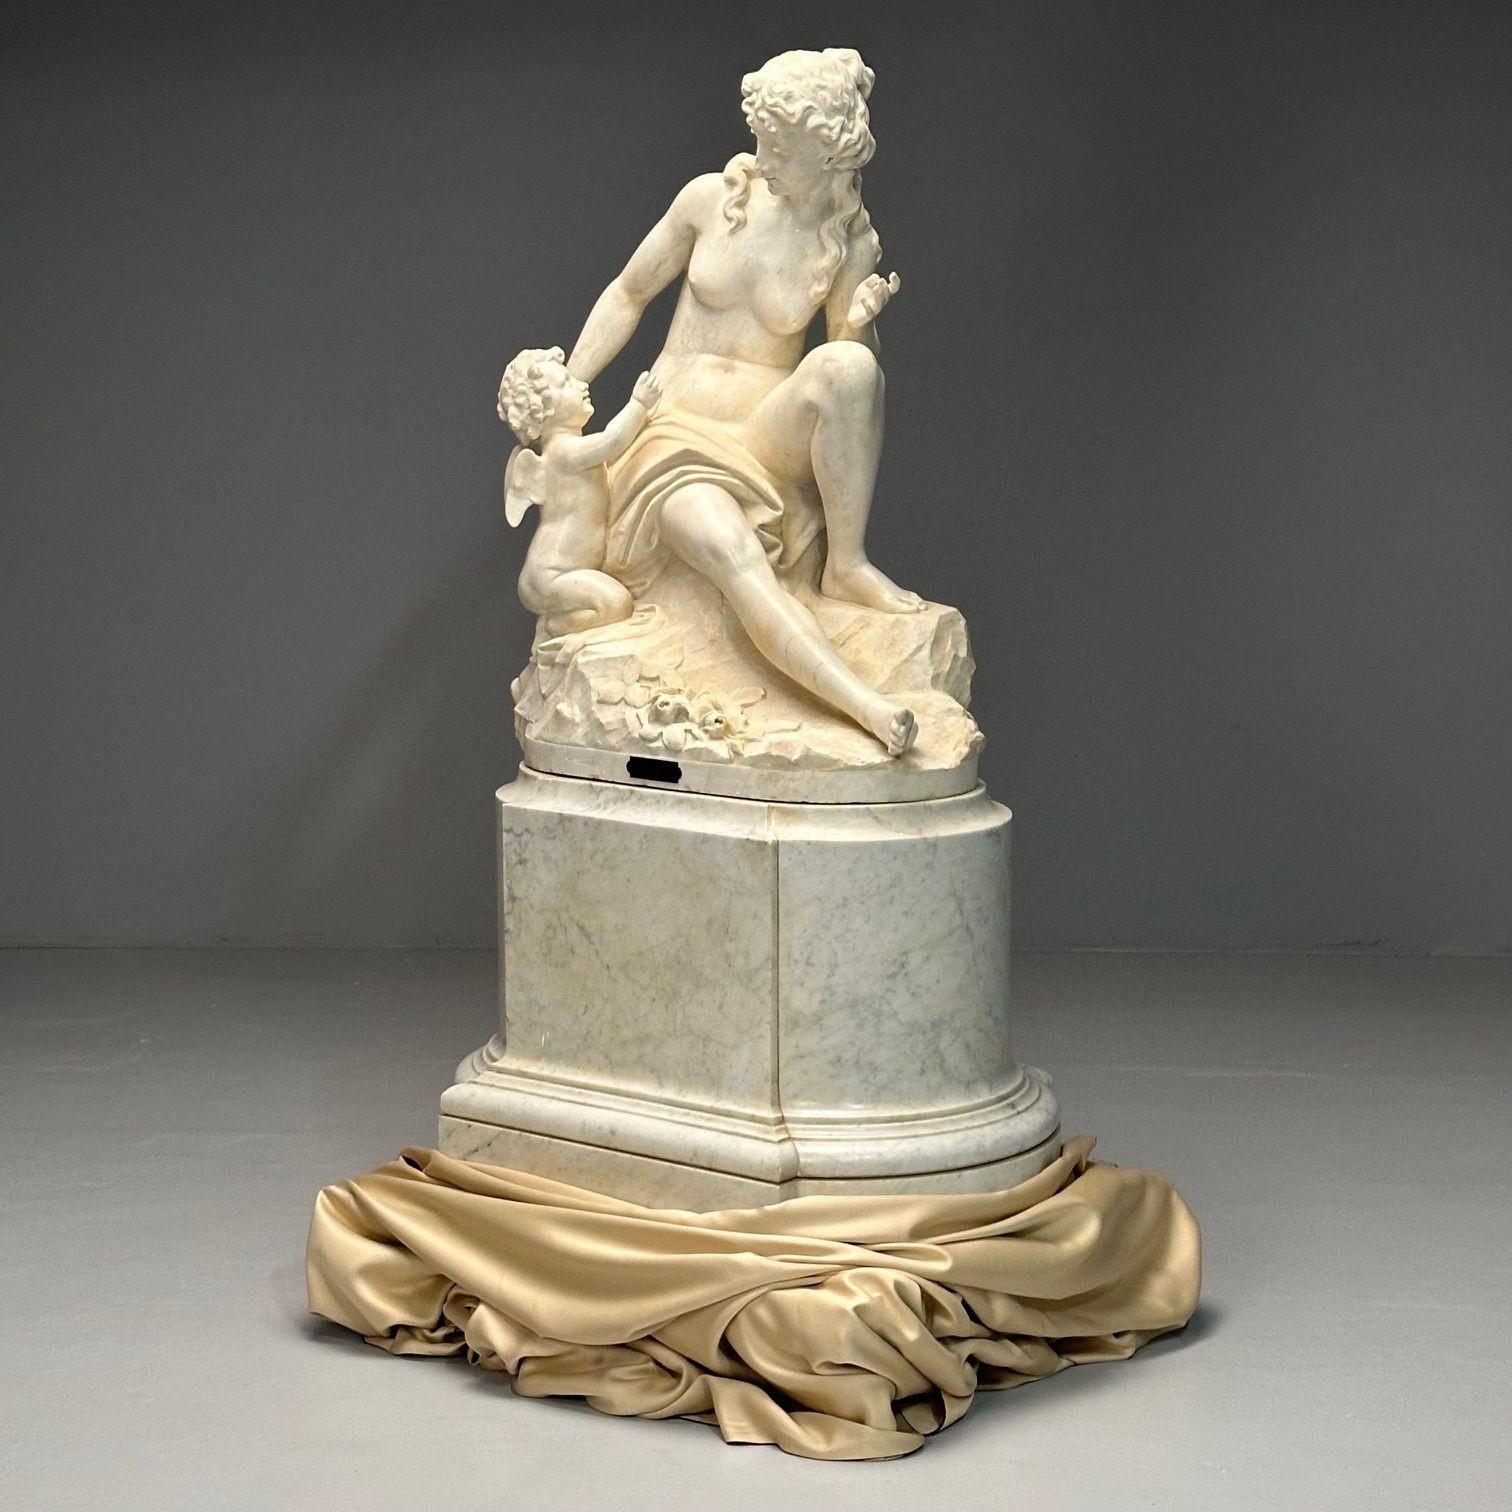 Jean-Marie Boucher, Venus and Cupid Marble Statue, White Marble, Romantic, c. 1910
 
Jean Boucher finely detailed marble sculpture on an impressive marble pedestal base. Plaque on base inscribed: VENUS AND CUPID / JEAN-MARIE BOUCHER
 
Sculpture 39